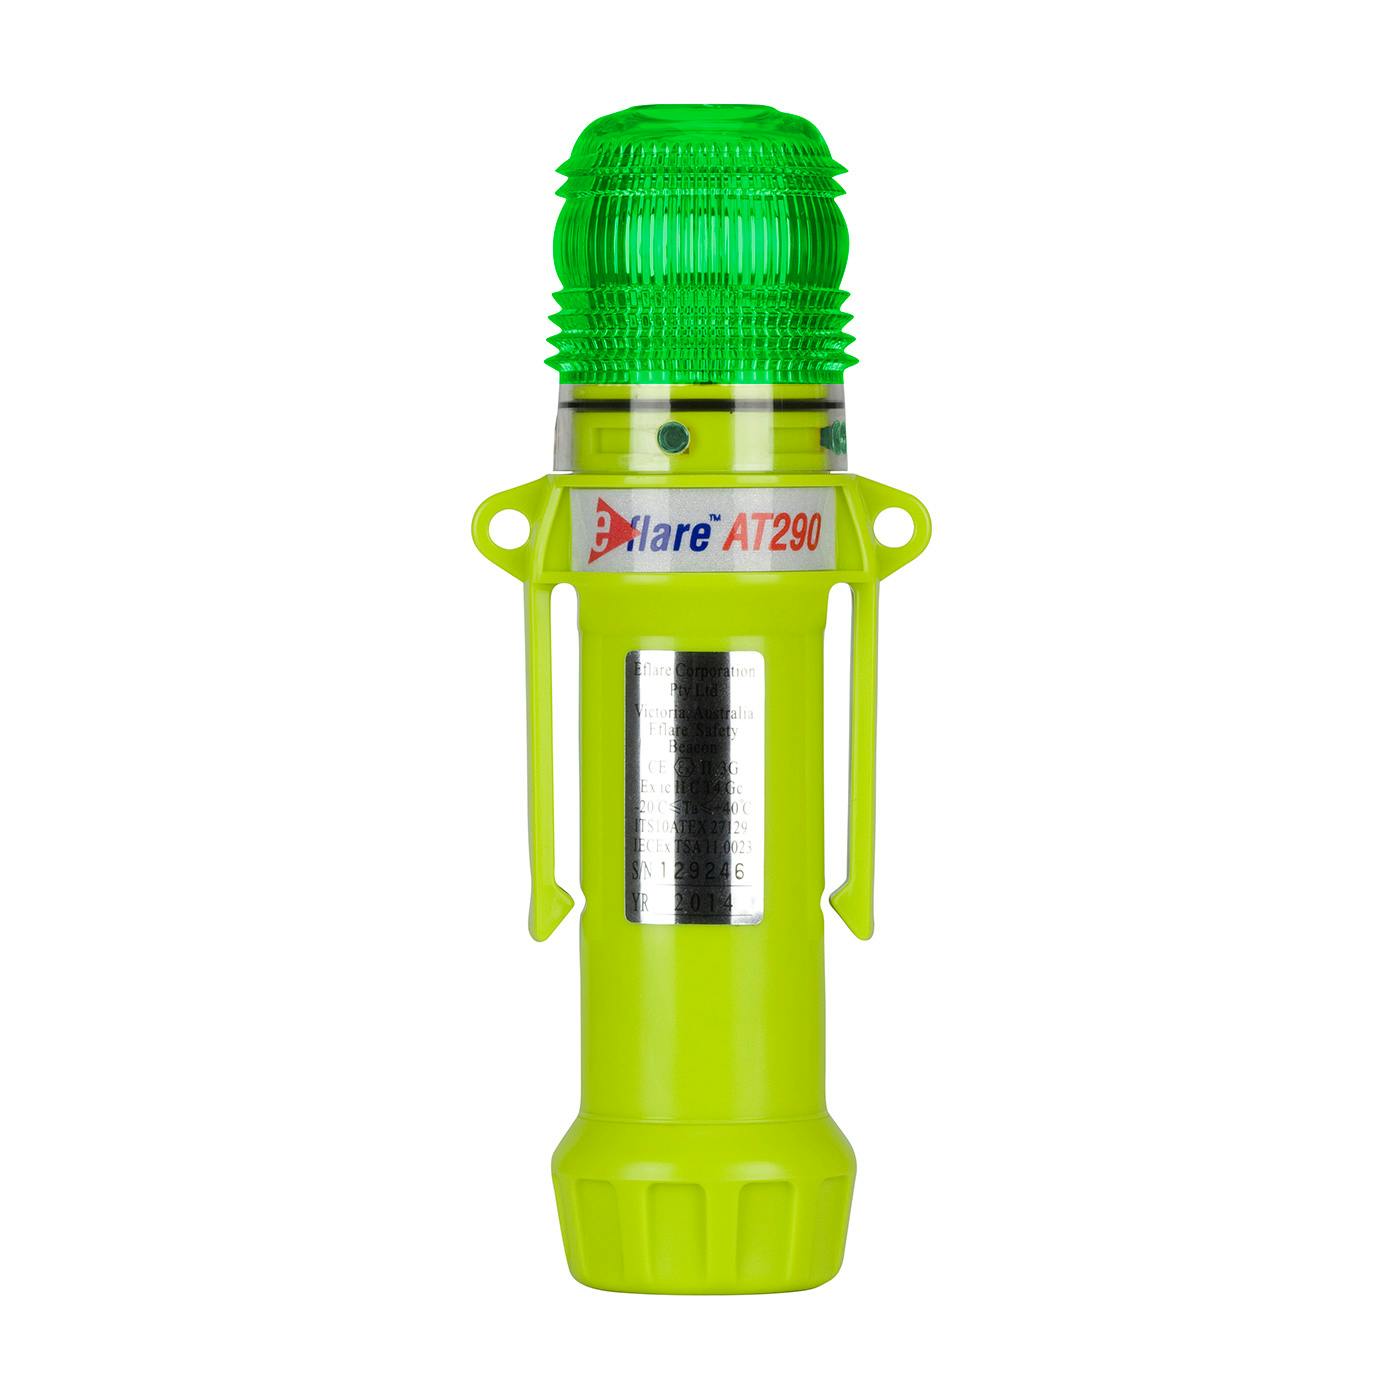 8" Safety & Emergency Beacon - Flashing / Steady-On Green, Green (939-AT290-G) - 8